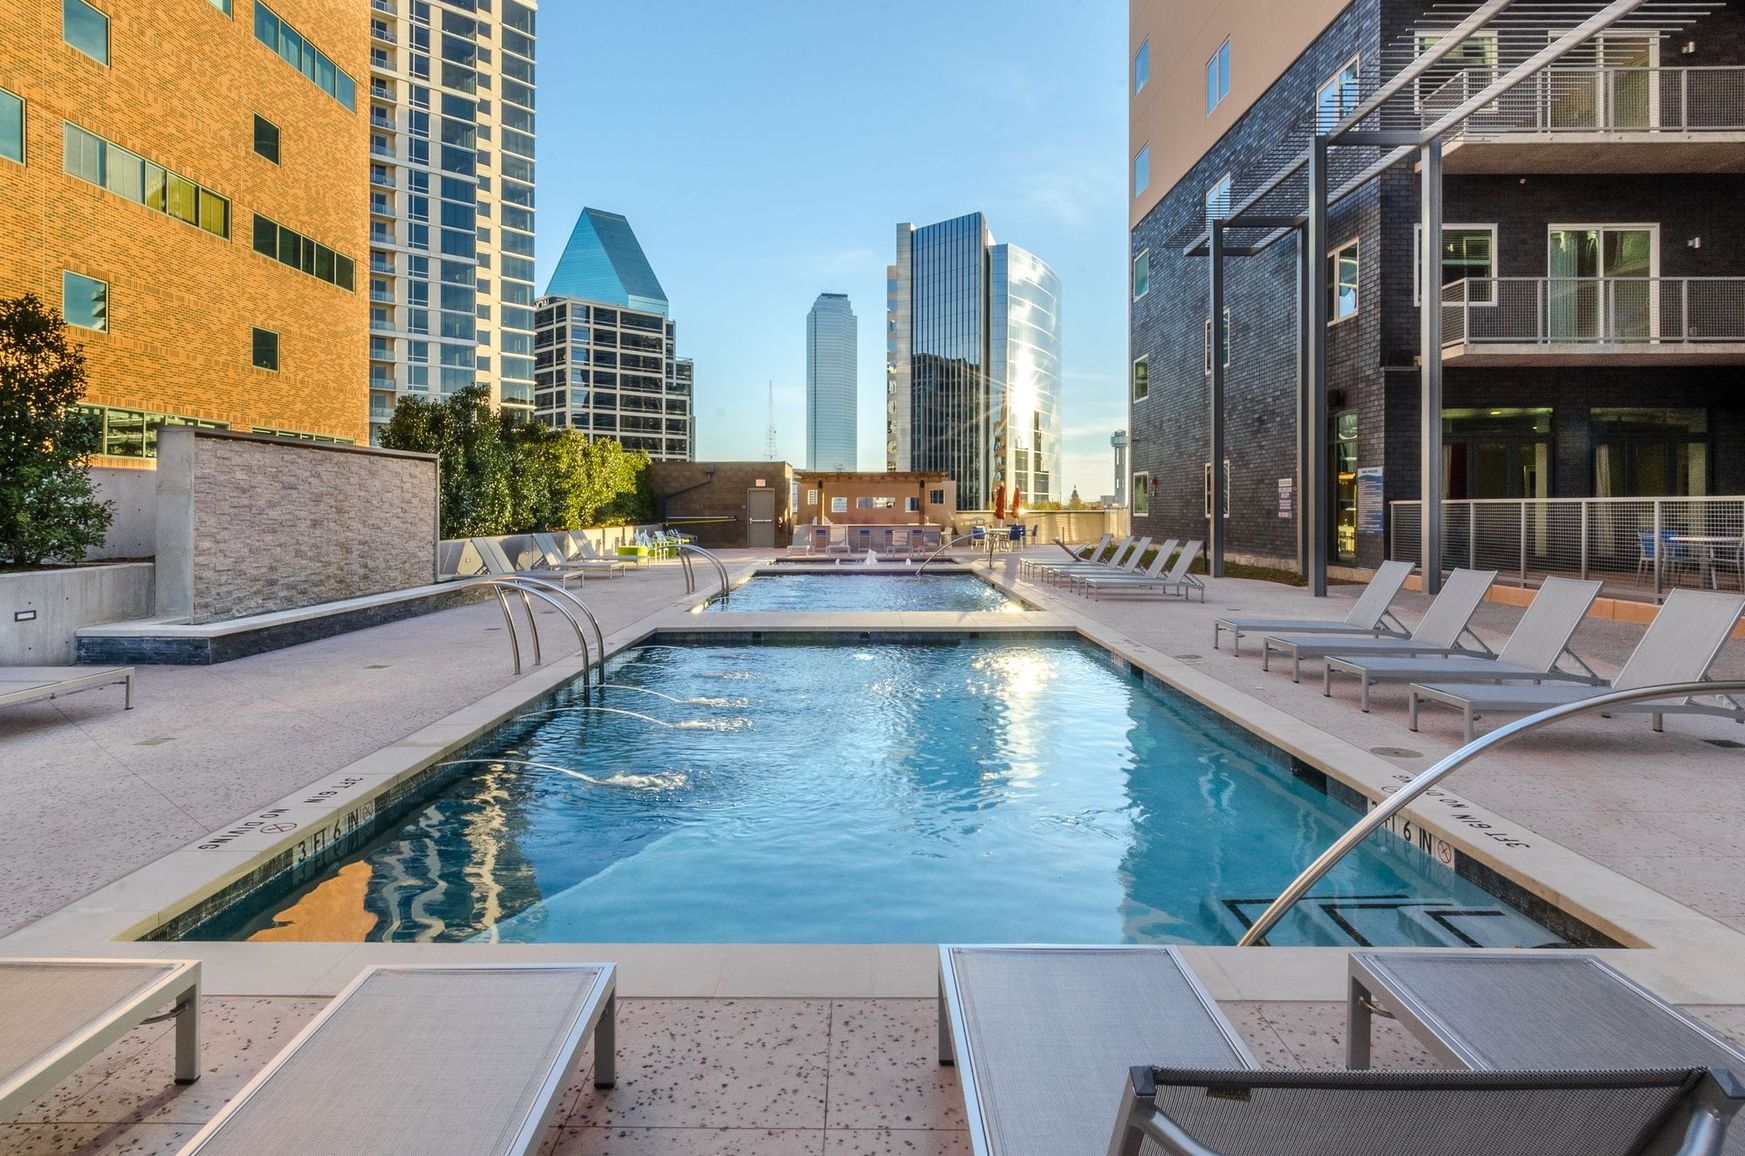 Apartments For In Dallas Texas, King Bed Dallas